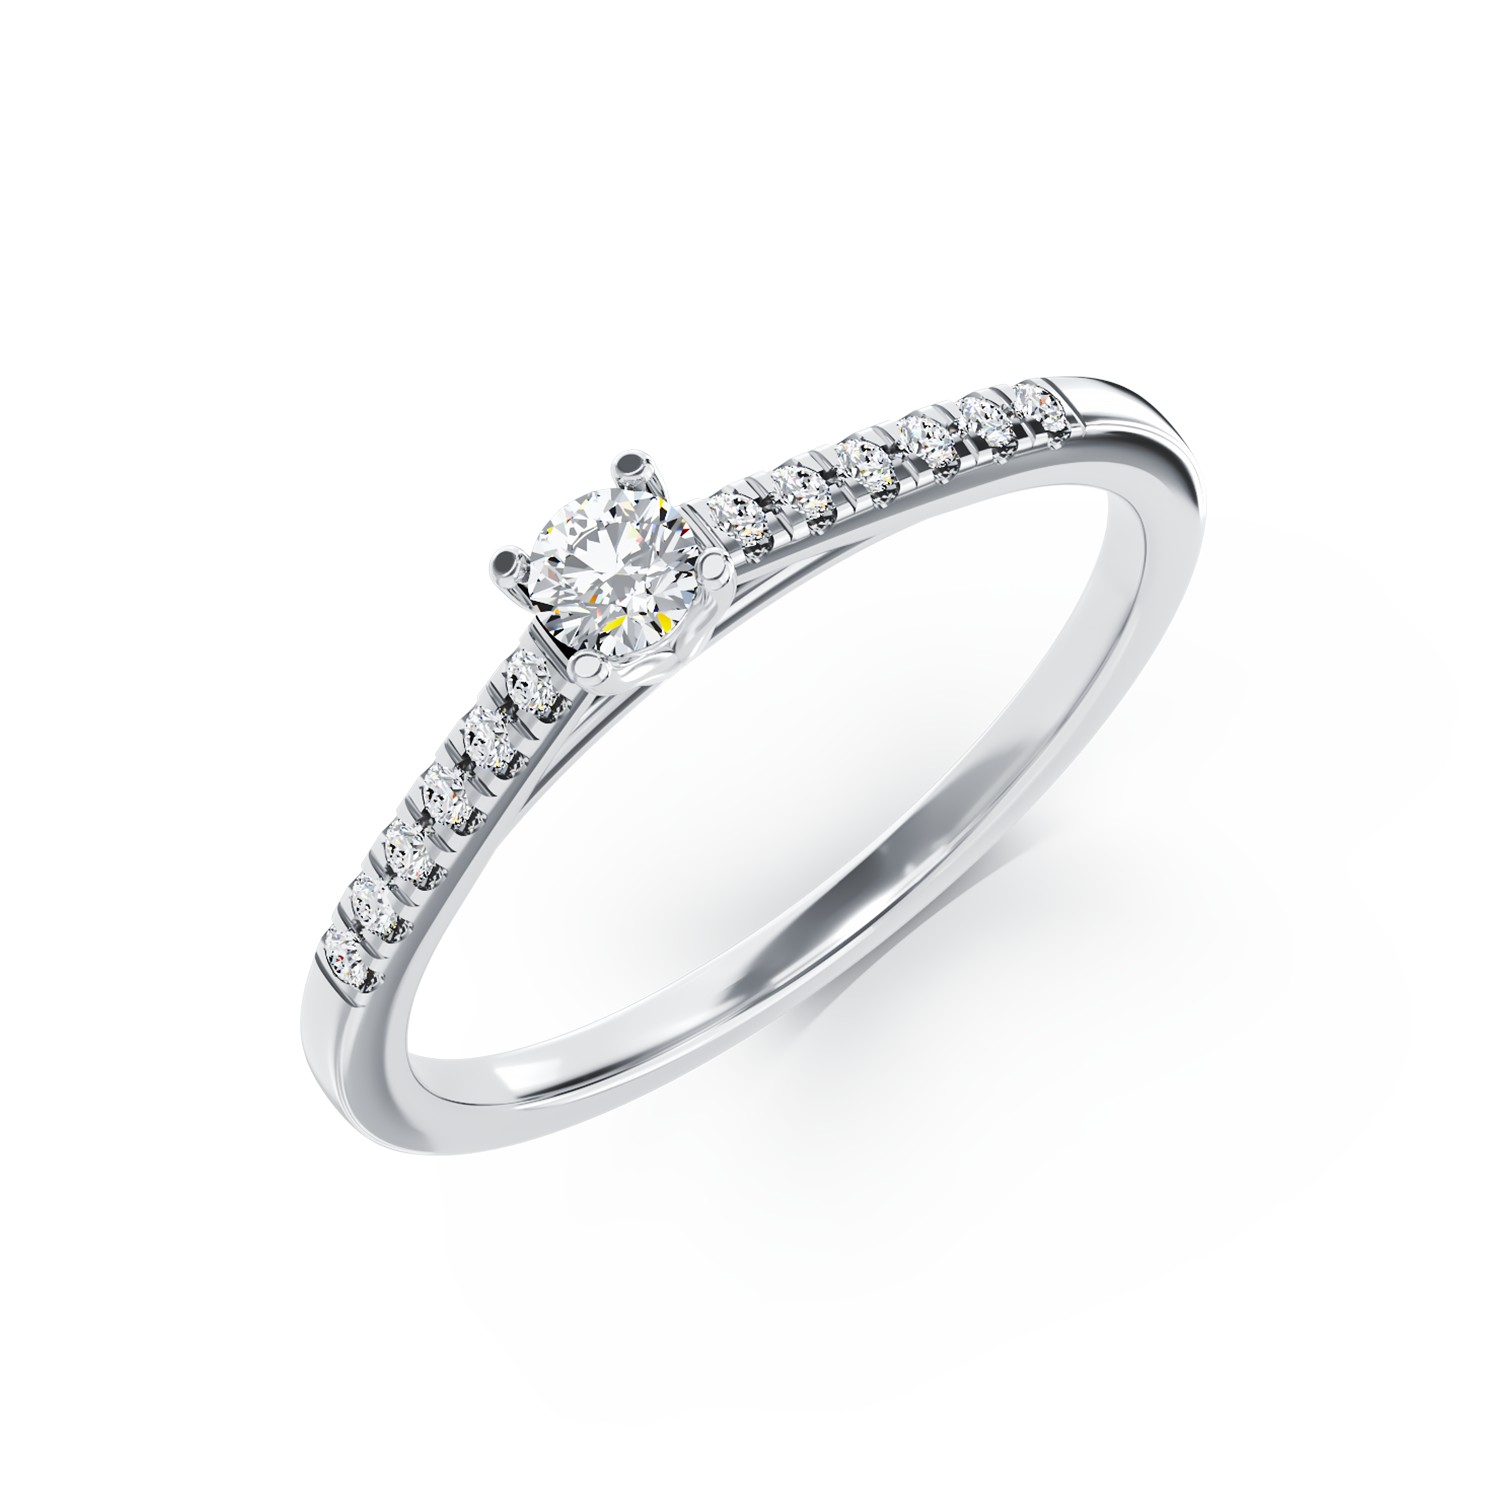 18K white gold engagement ring with 0.24ct diamond and 0.13ct diamonds